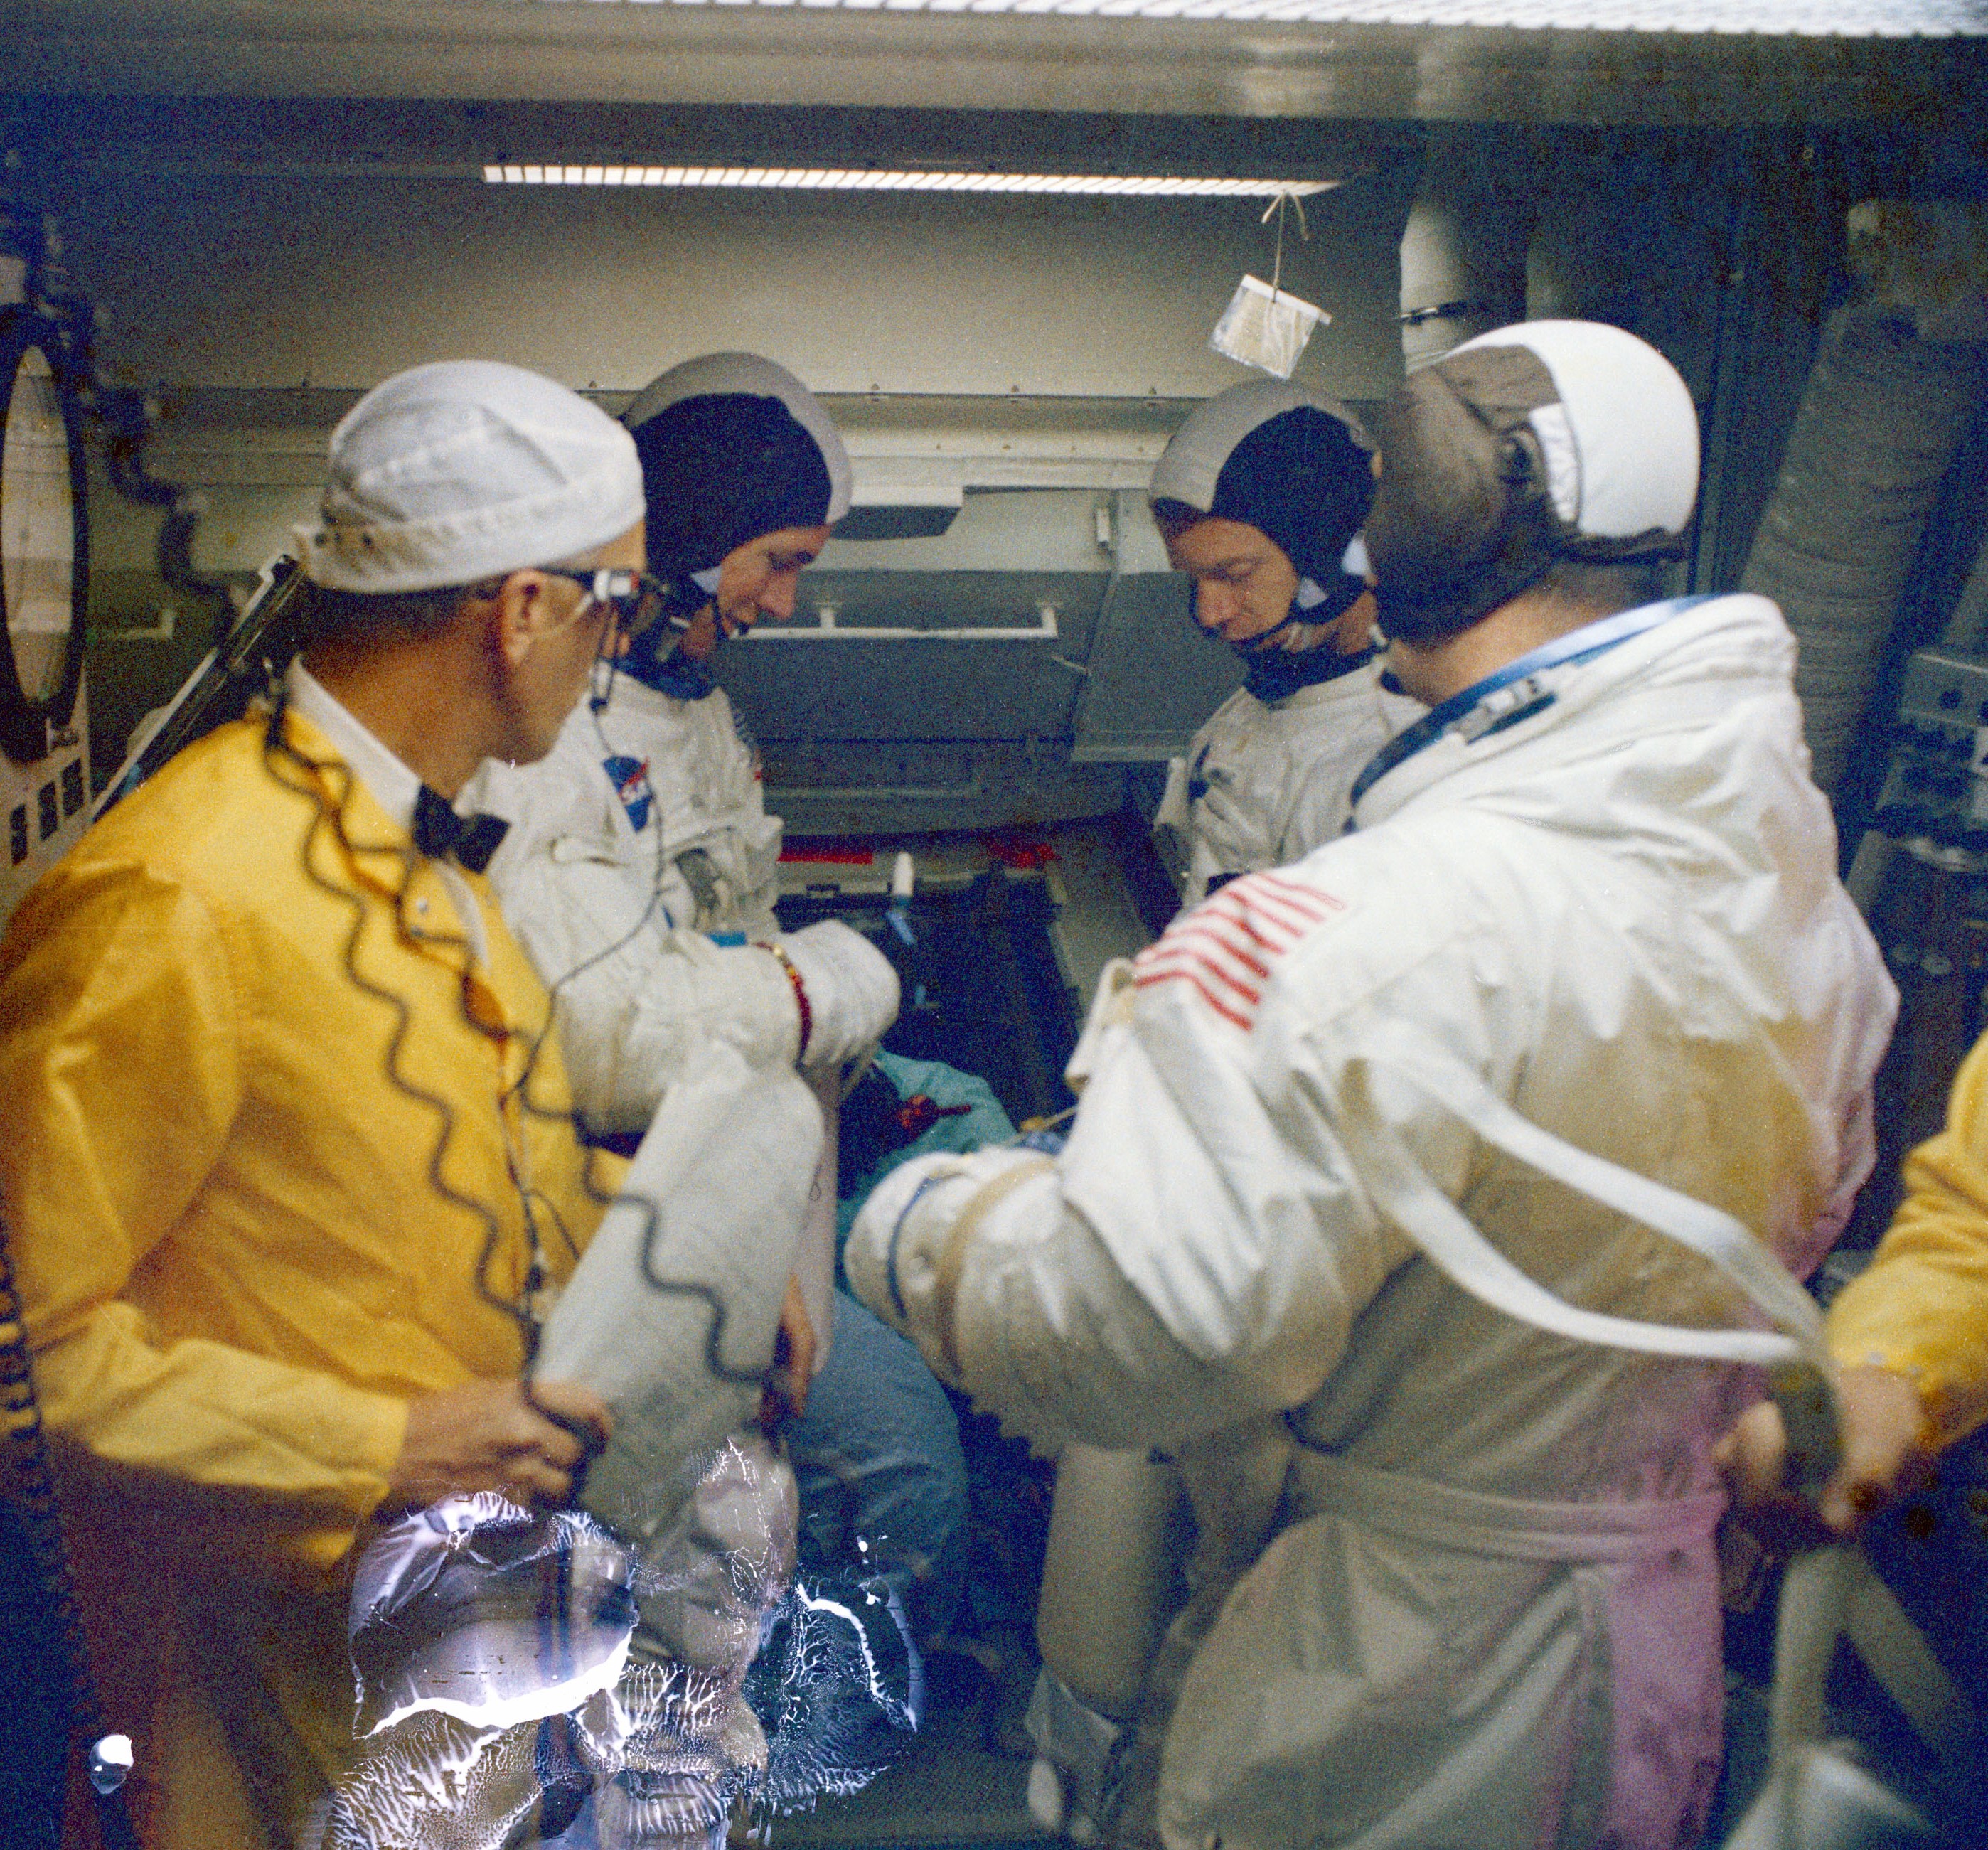 Scott, left, Schweickart, and McDivitt in the White Room during the pad emergency escape drill